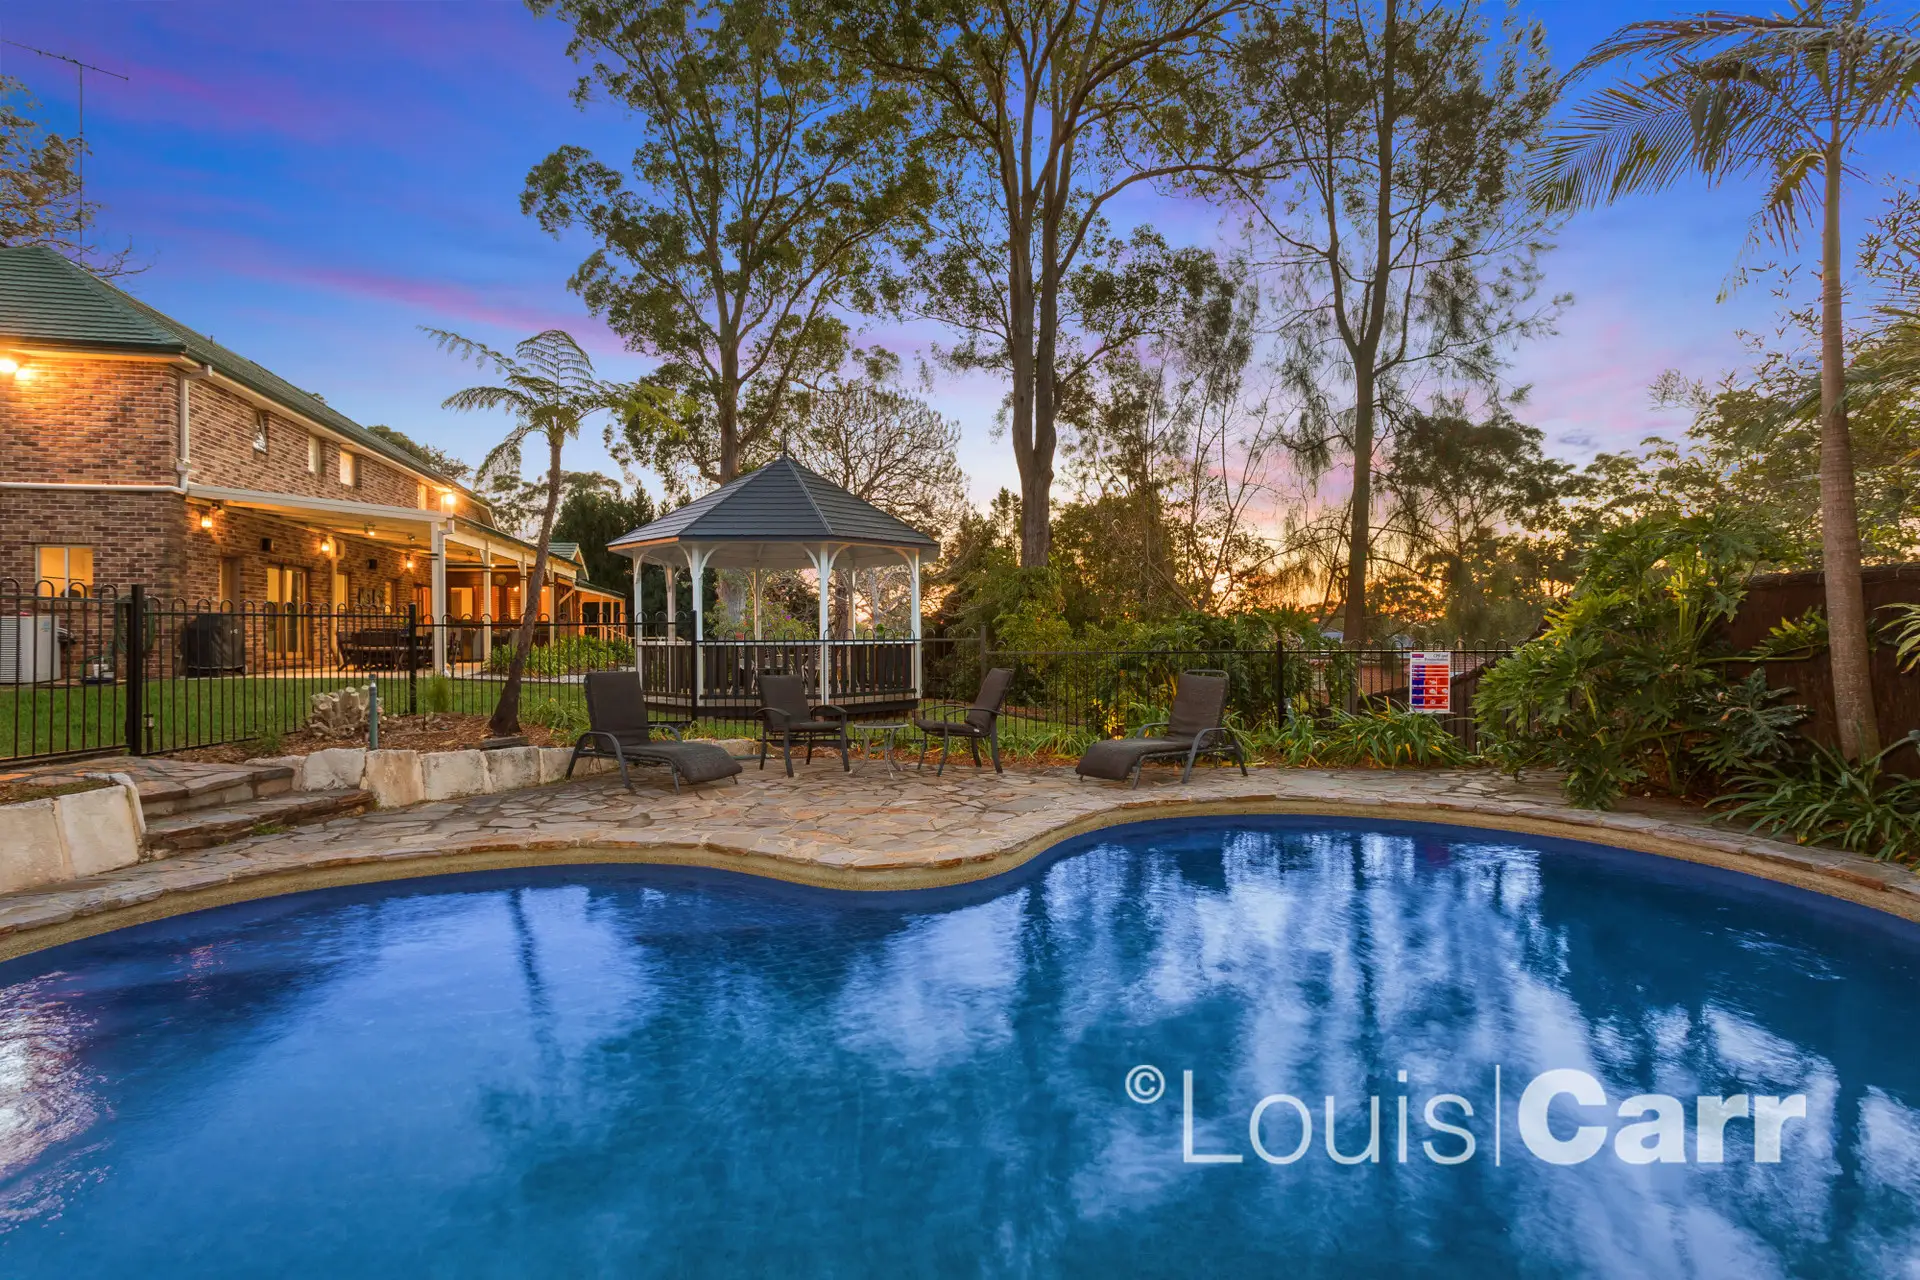 Photo #14: 16 Crego Road, Glenhaven - Sold by Louis Carr Real Estate